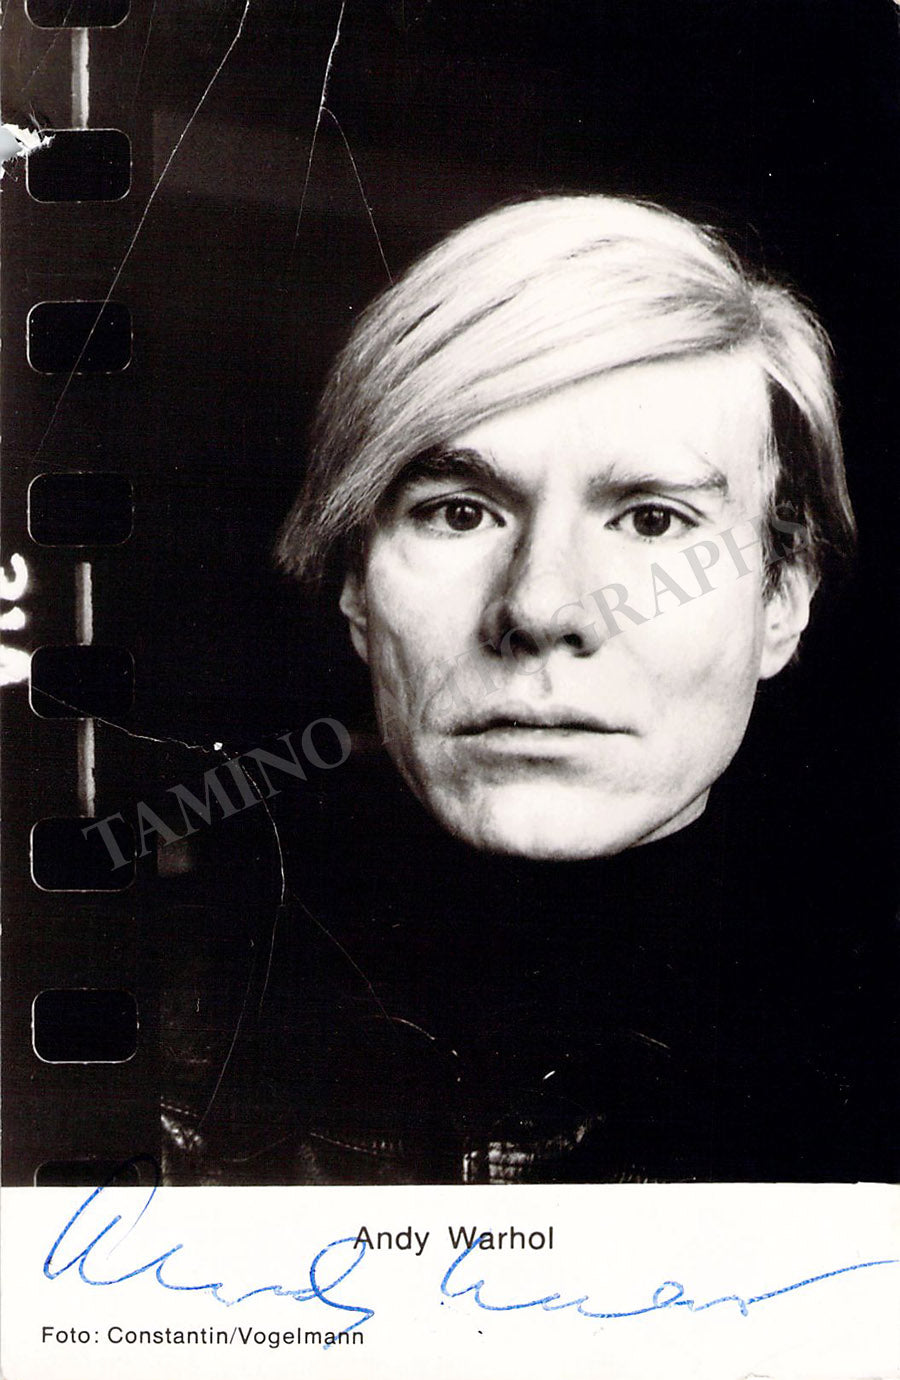 Warhol, Andy - Signed Photograph